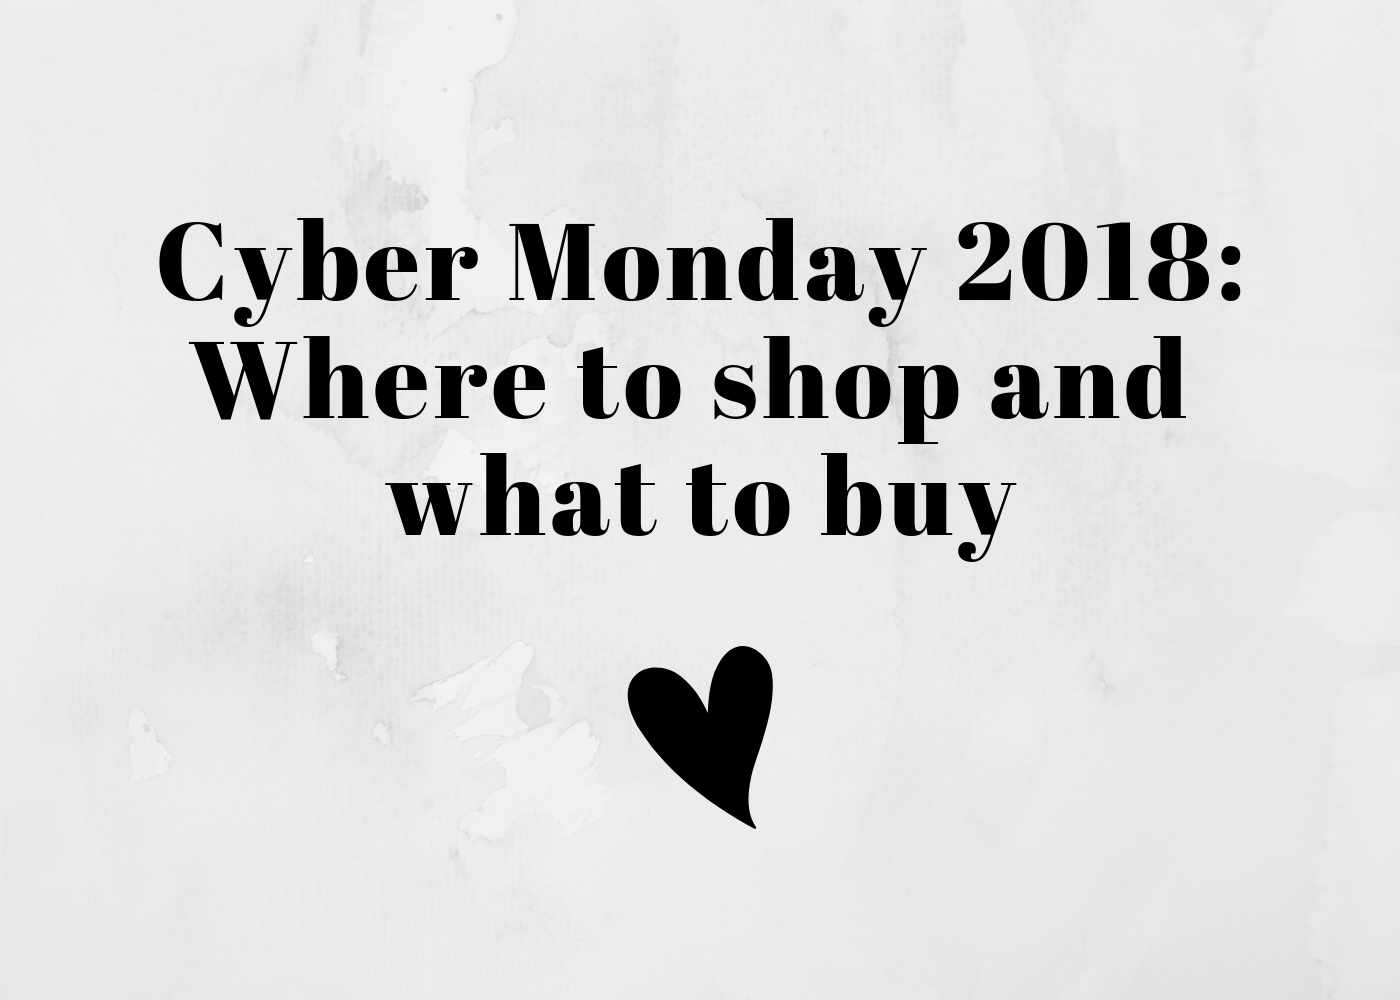 Cyber Monday 2018: What’s Hot